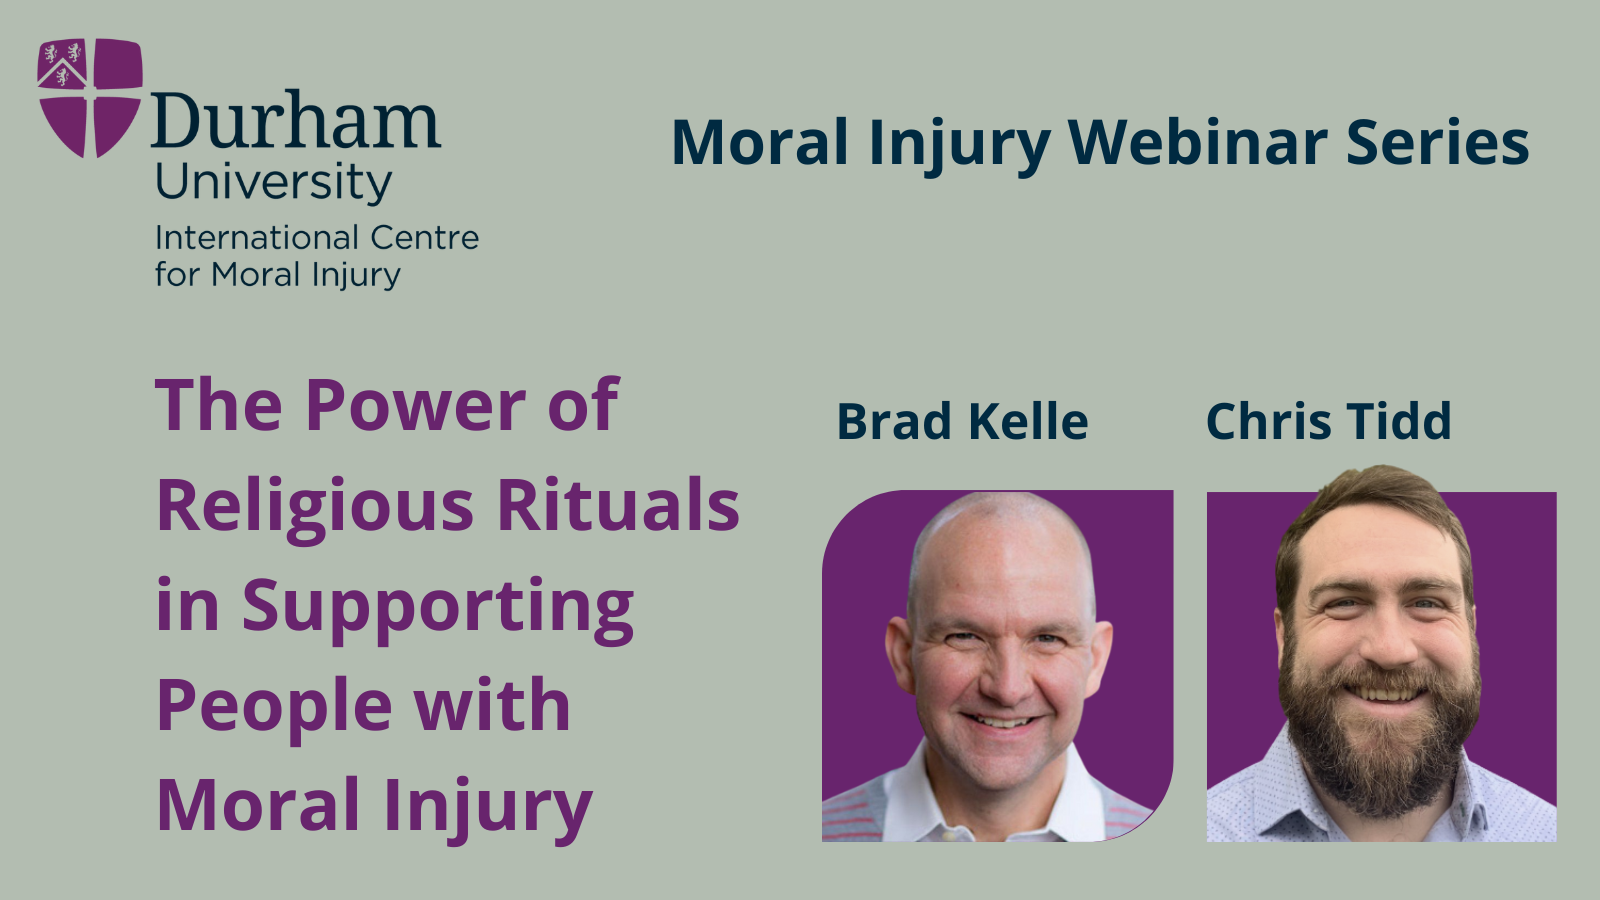 The Power of Religious Rituals in Supporting People with Moral Injury, by Brad Kelle and Chris Tidd